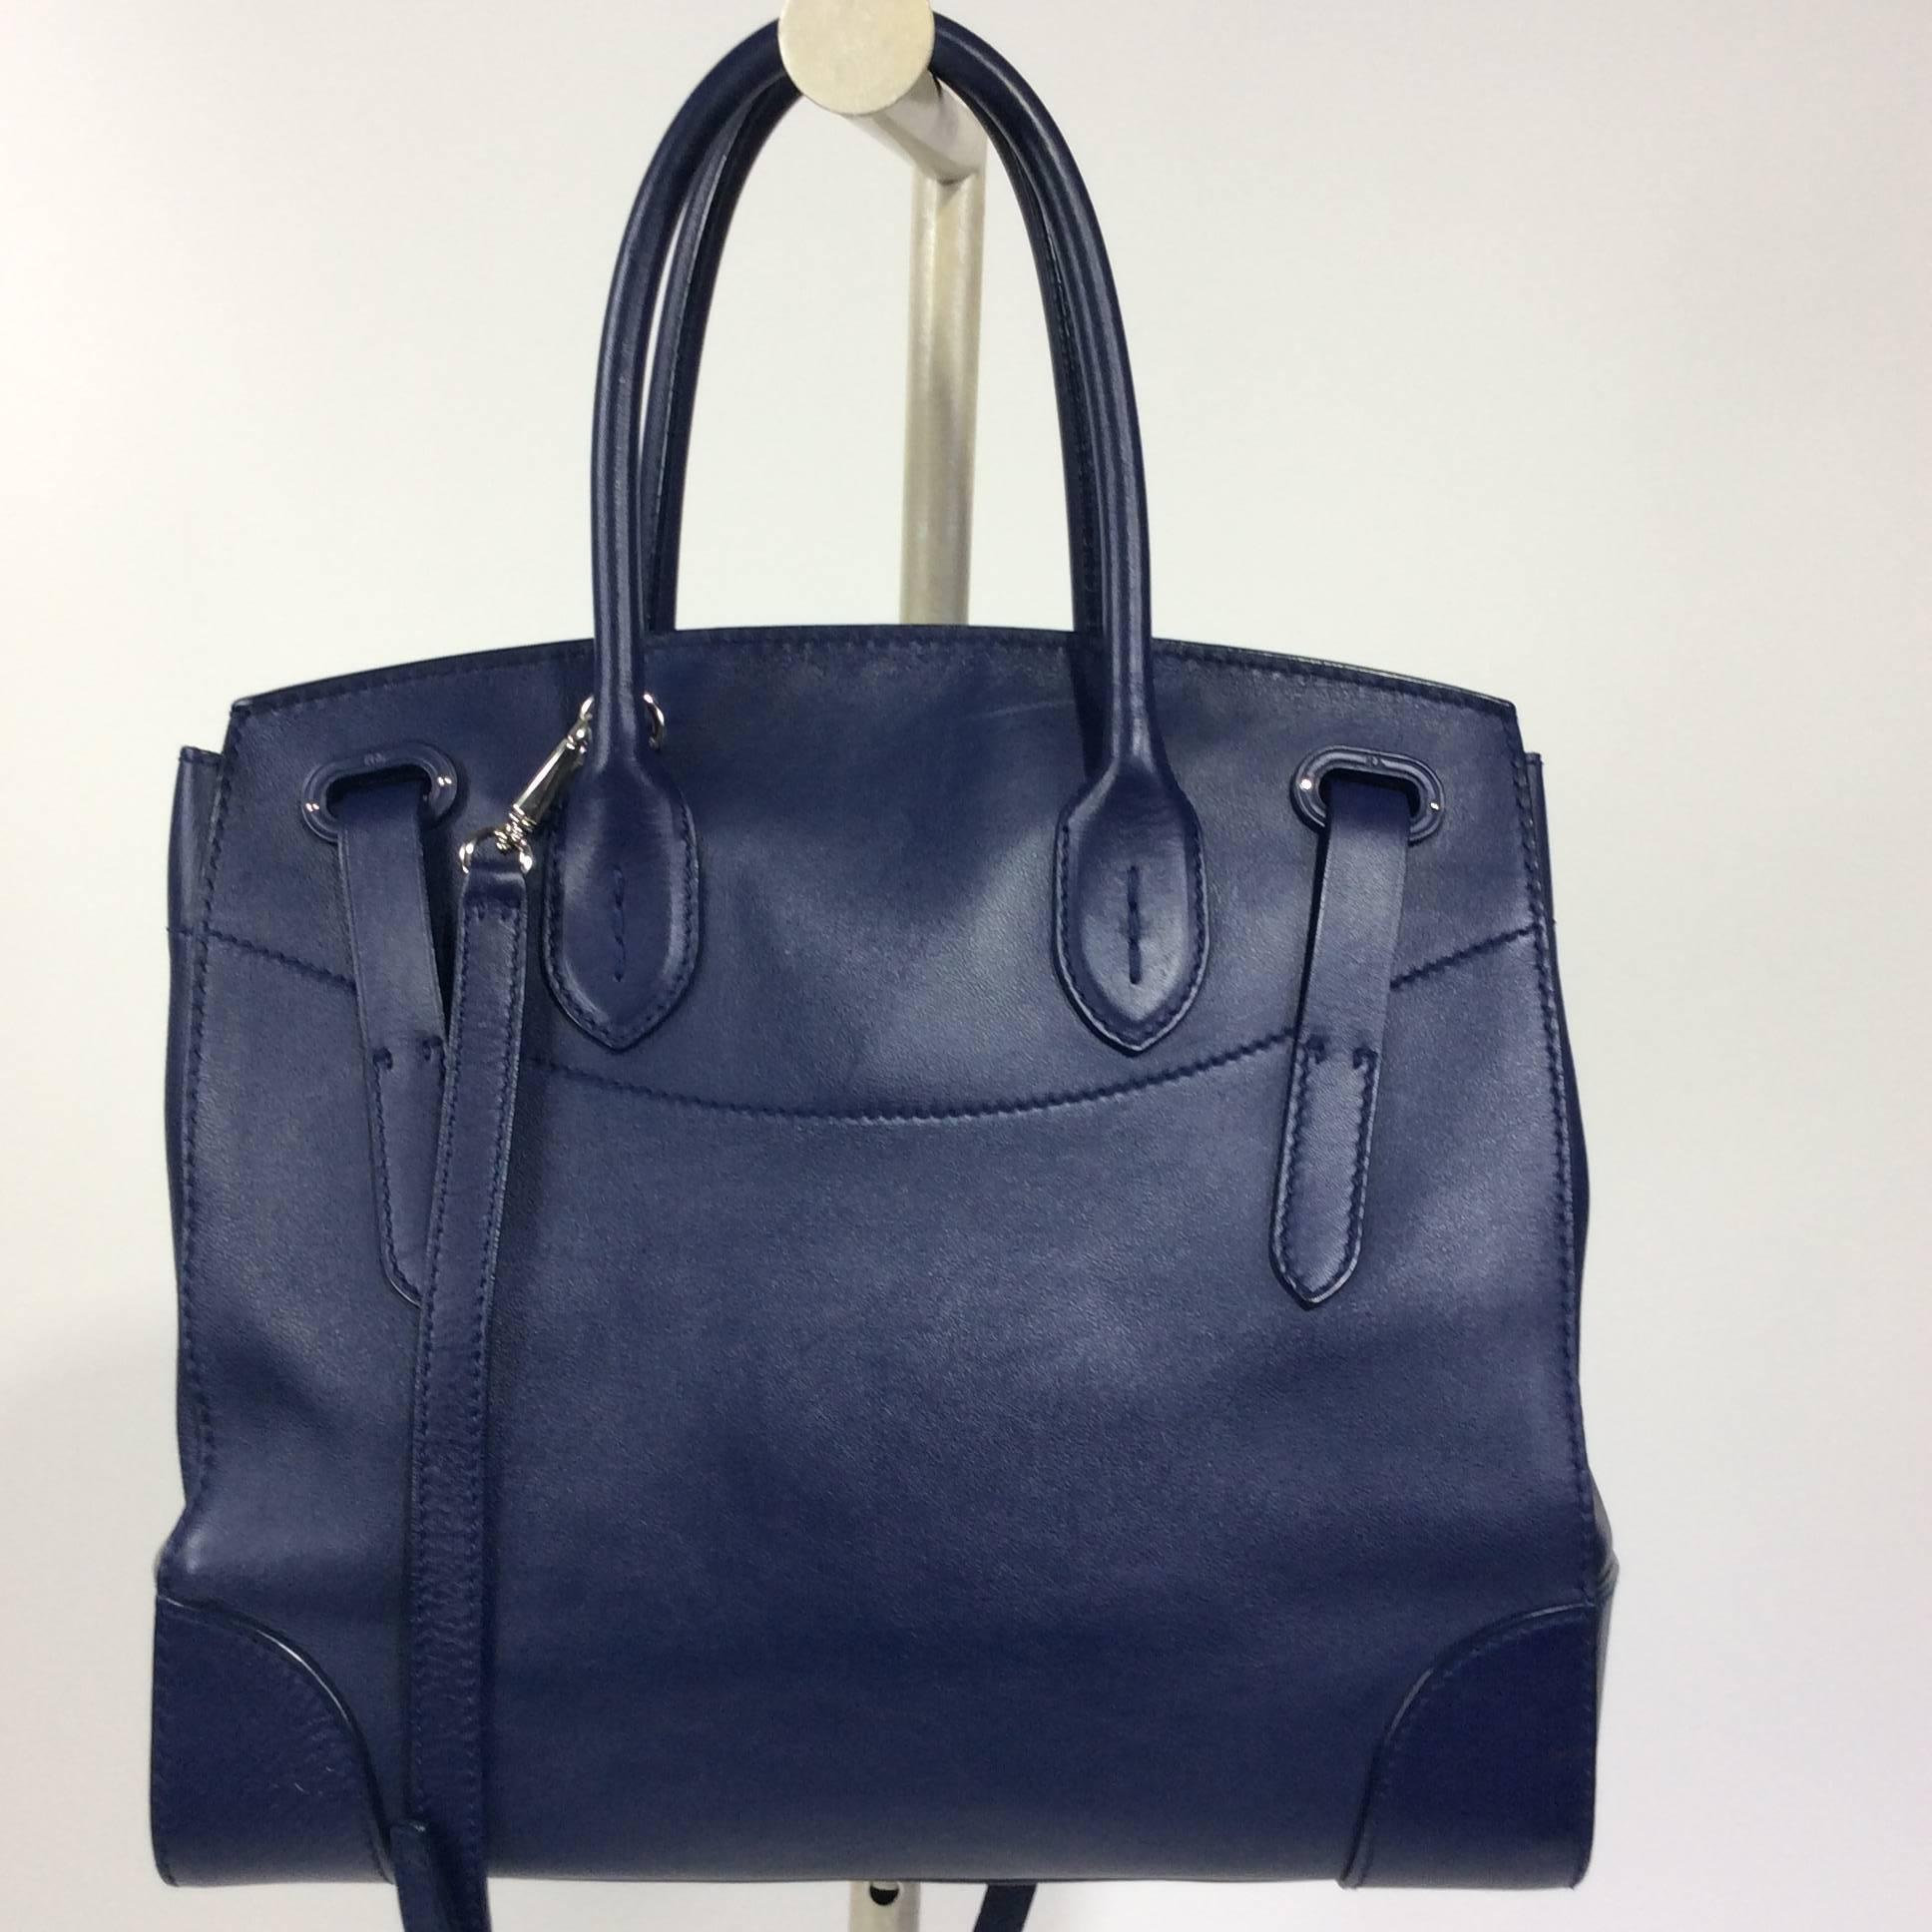 Ralph Lauren Navy Rickie bag with silver hardware and red interior lining. The bag has a removable shoulder strap which adds a 21